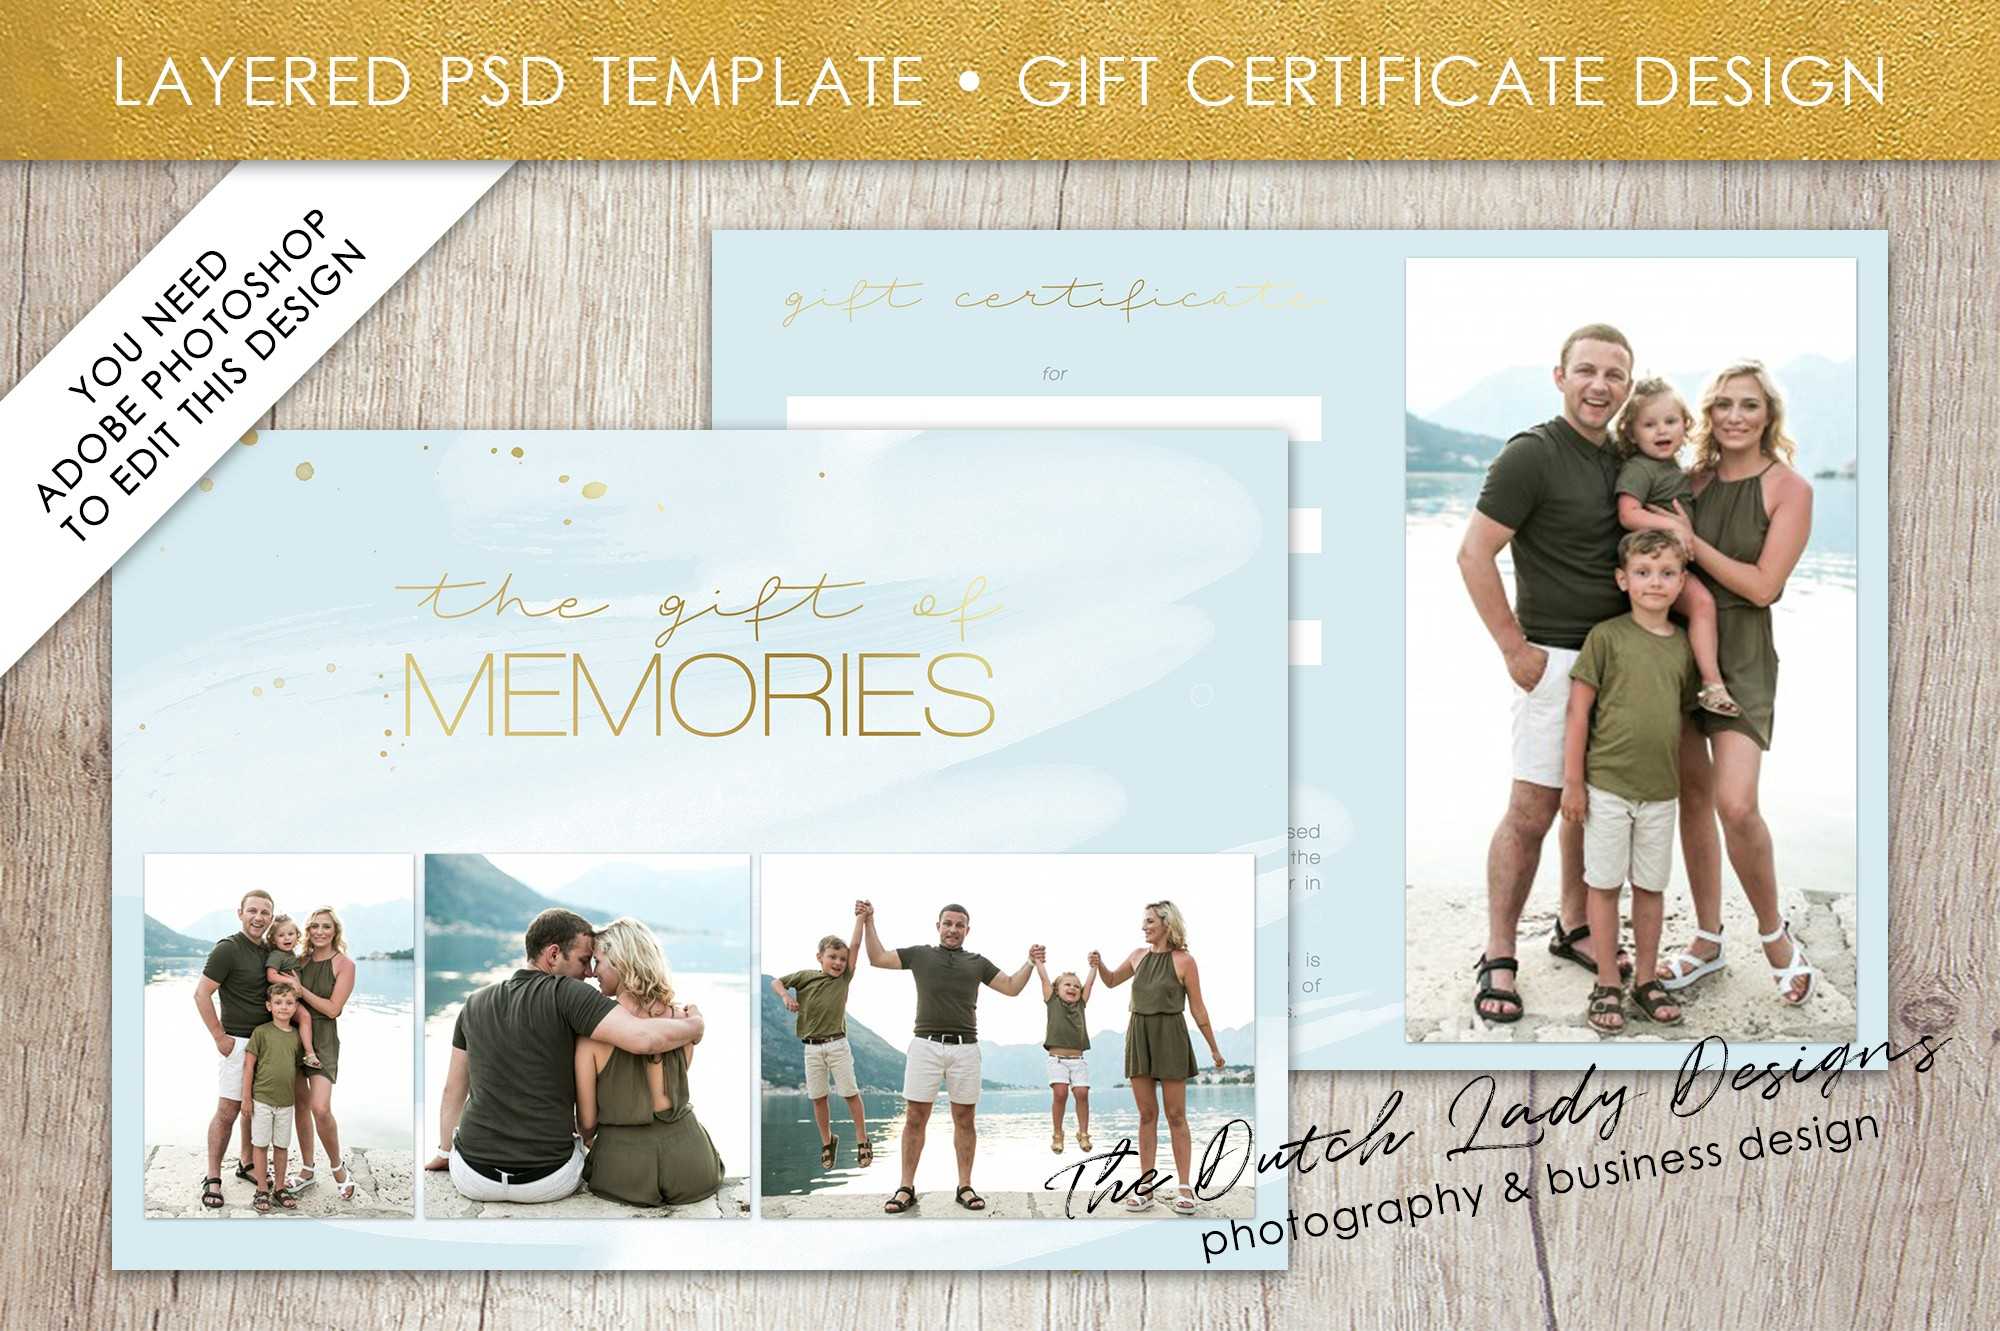 Photoshoot Gift Certificate Template Photography Photo Card With Photoshoot Gift Certificate Template